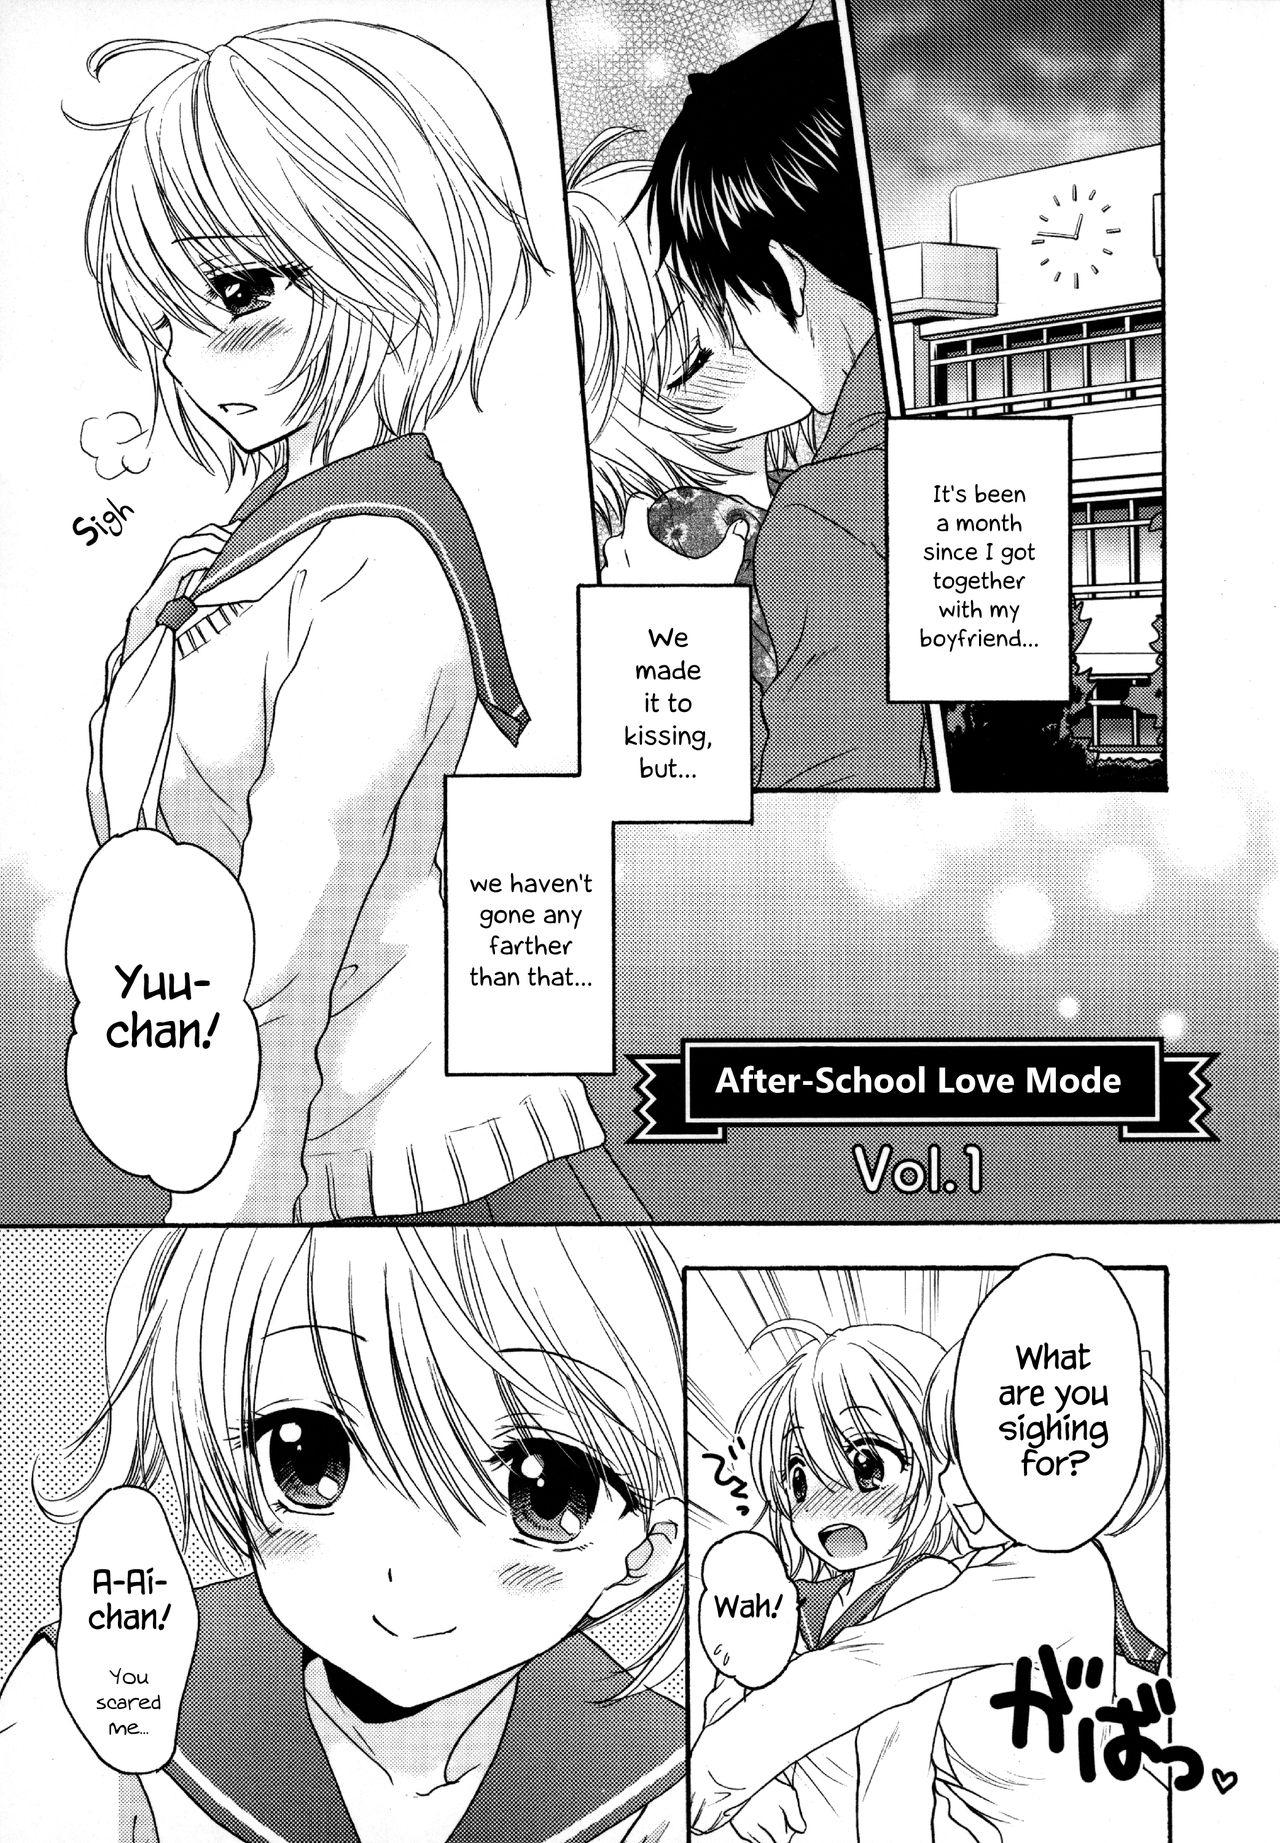 Houkago Love Mode – It is a love mode after school 53